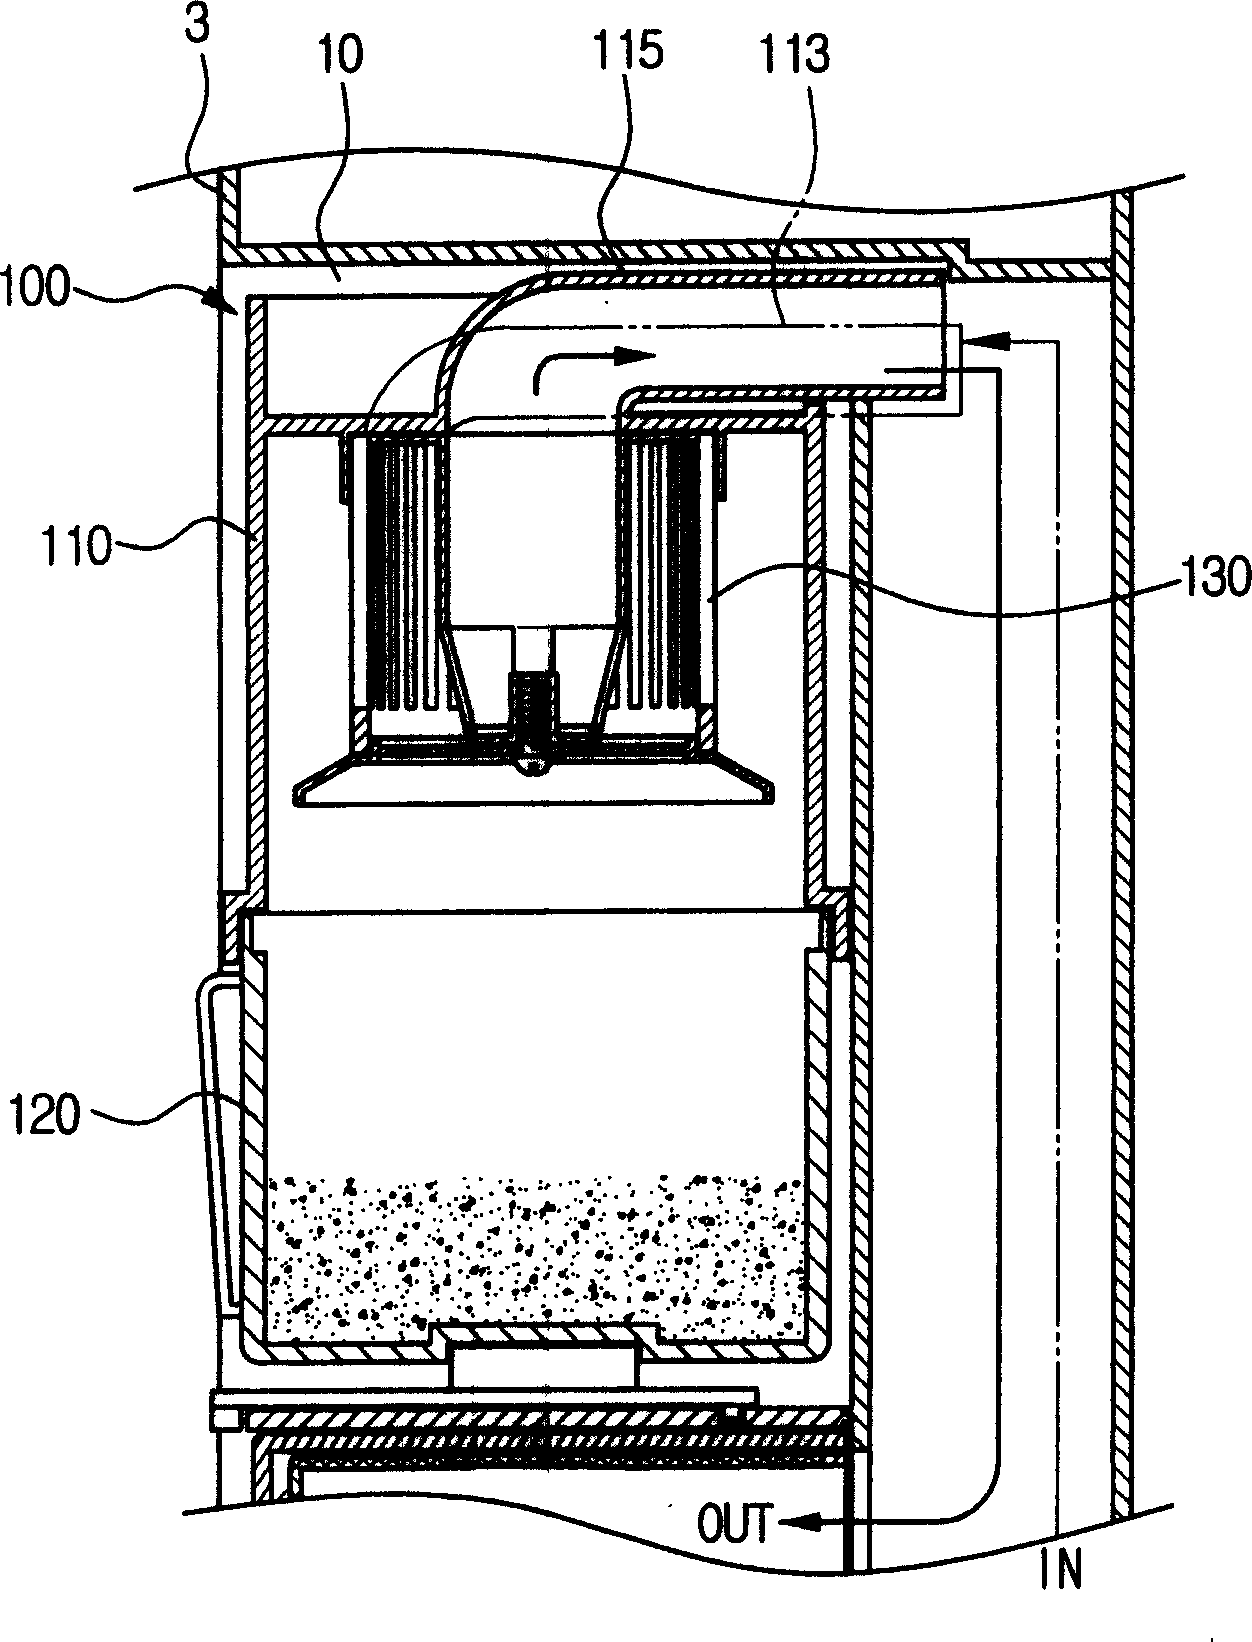 Cyclone type dust collecting apparatus of vacuum cleaner